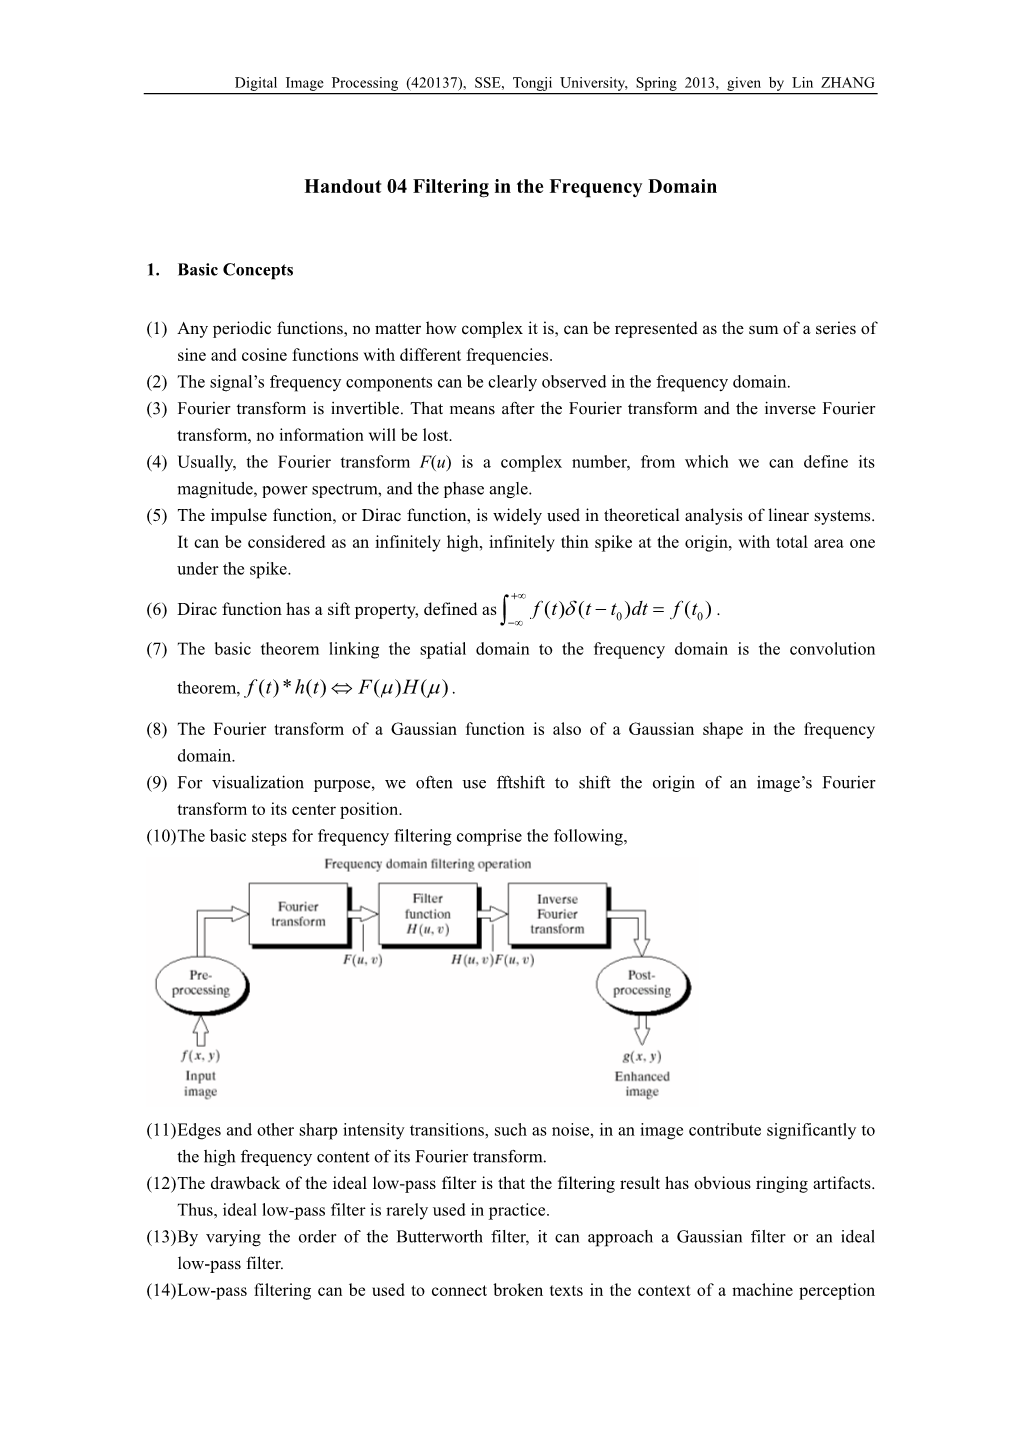 Handout 04 Filtering in the Frequency Domain